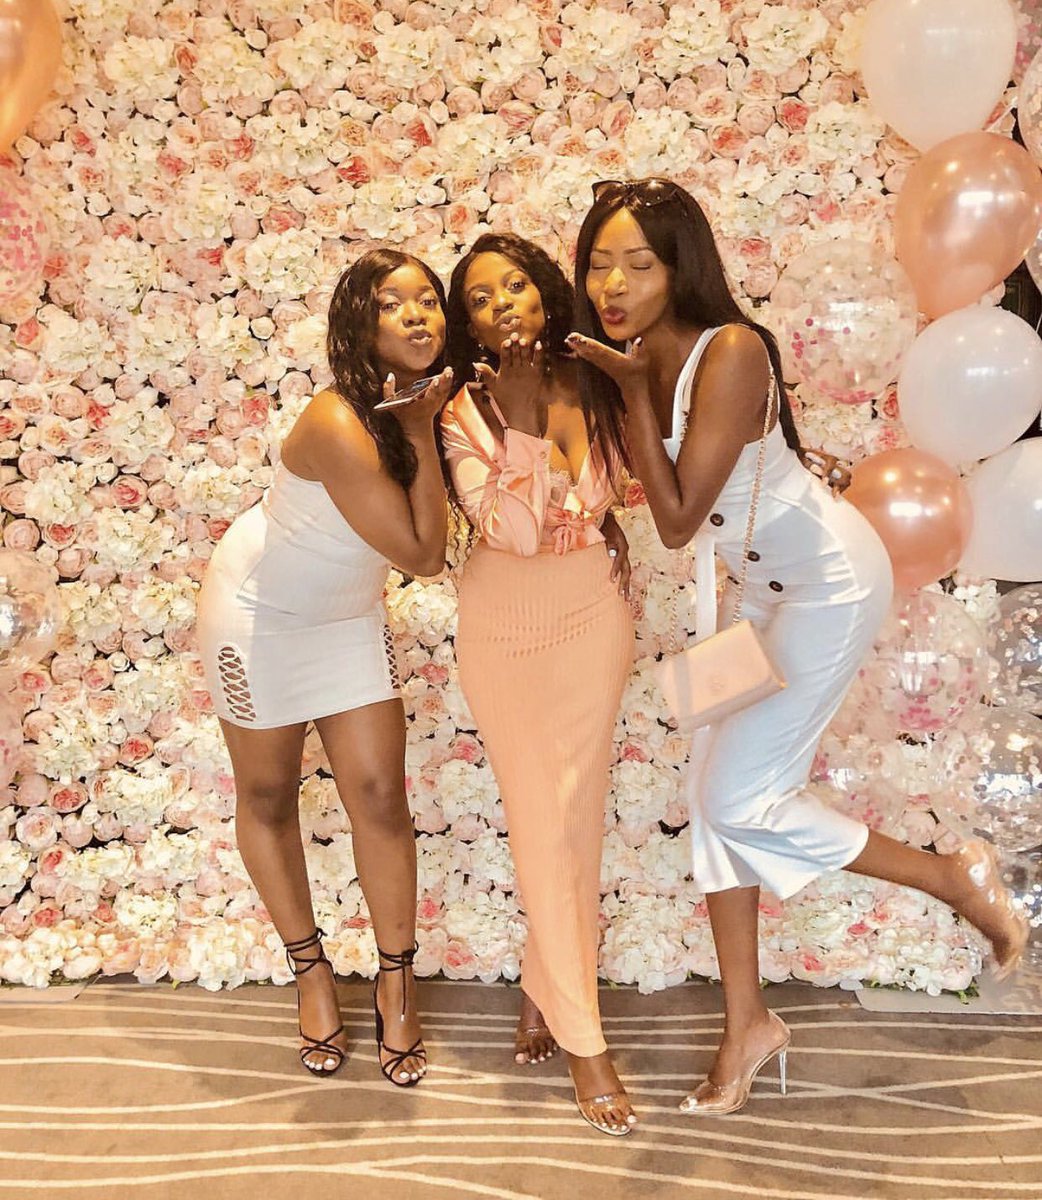 Beautiful ladies with our Pink Blush Flower Wall. Happy 21st Birthday Agnater 💗🌸
#flowerwall #21stbirthday #21stbirthdayparty #specialevents #floral #luxury #floraldisplay #eventinspiration #eventdecor #flowerbackdrop #backdrop #eventplanning #photography @alberts_worsley